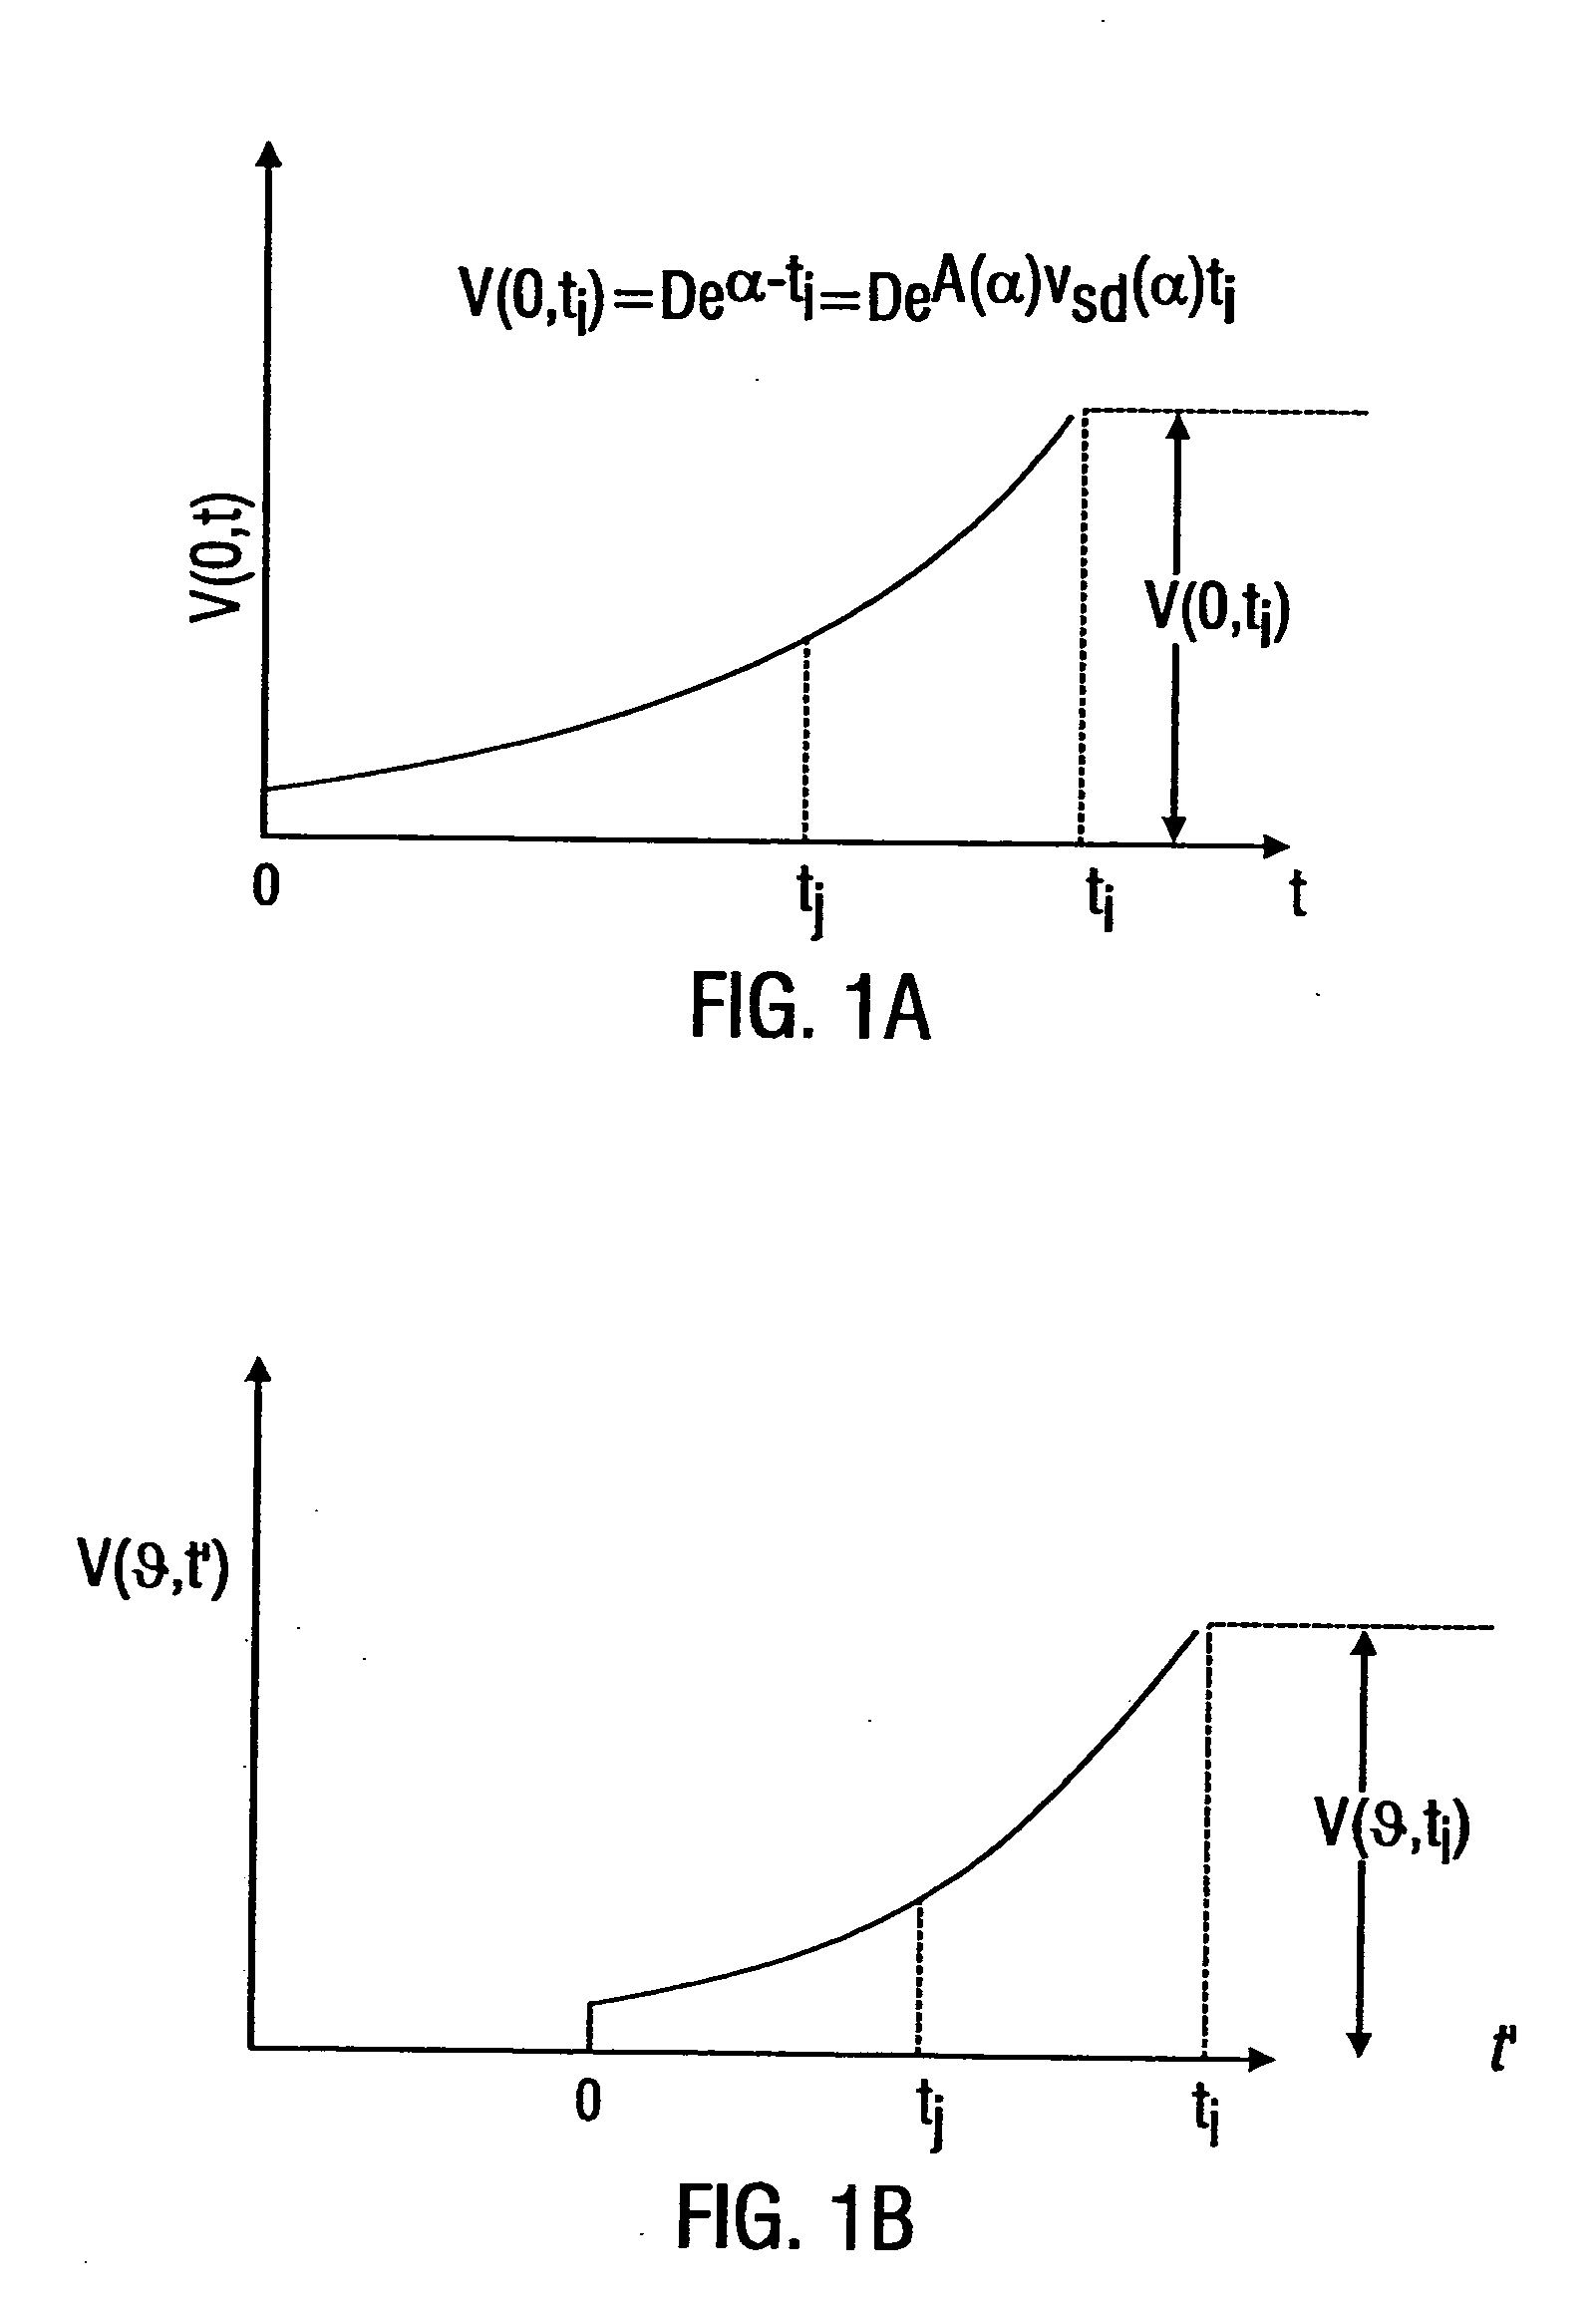 Methods for propagating a non sinusoidal signal without distortion in dispersive lossy media